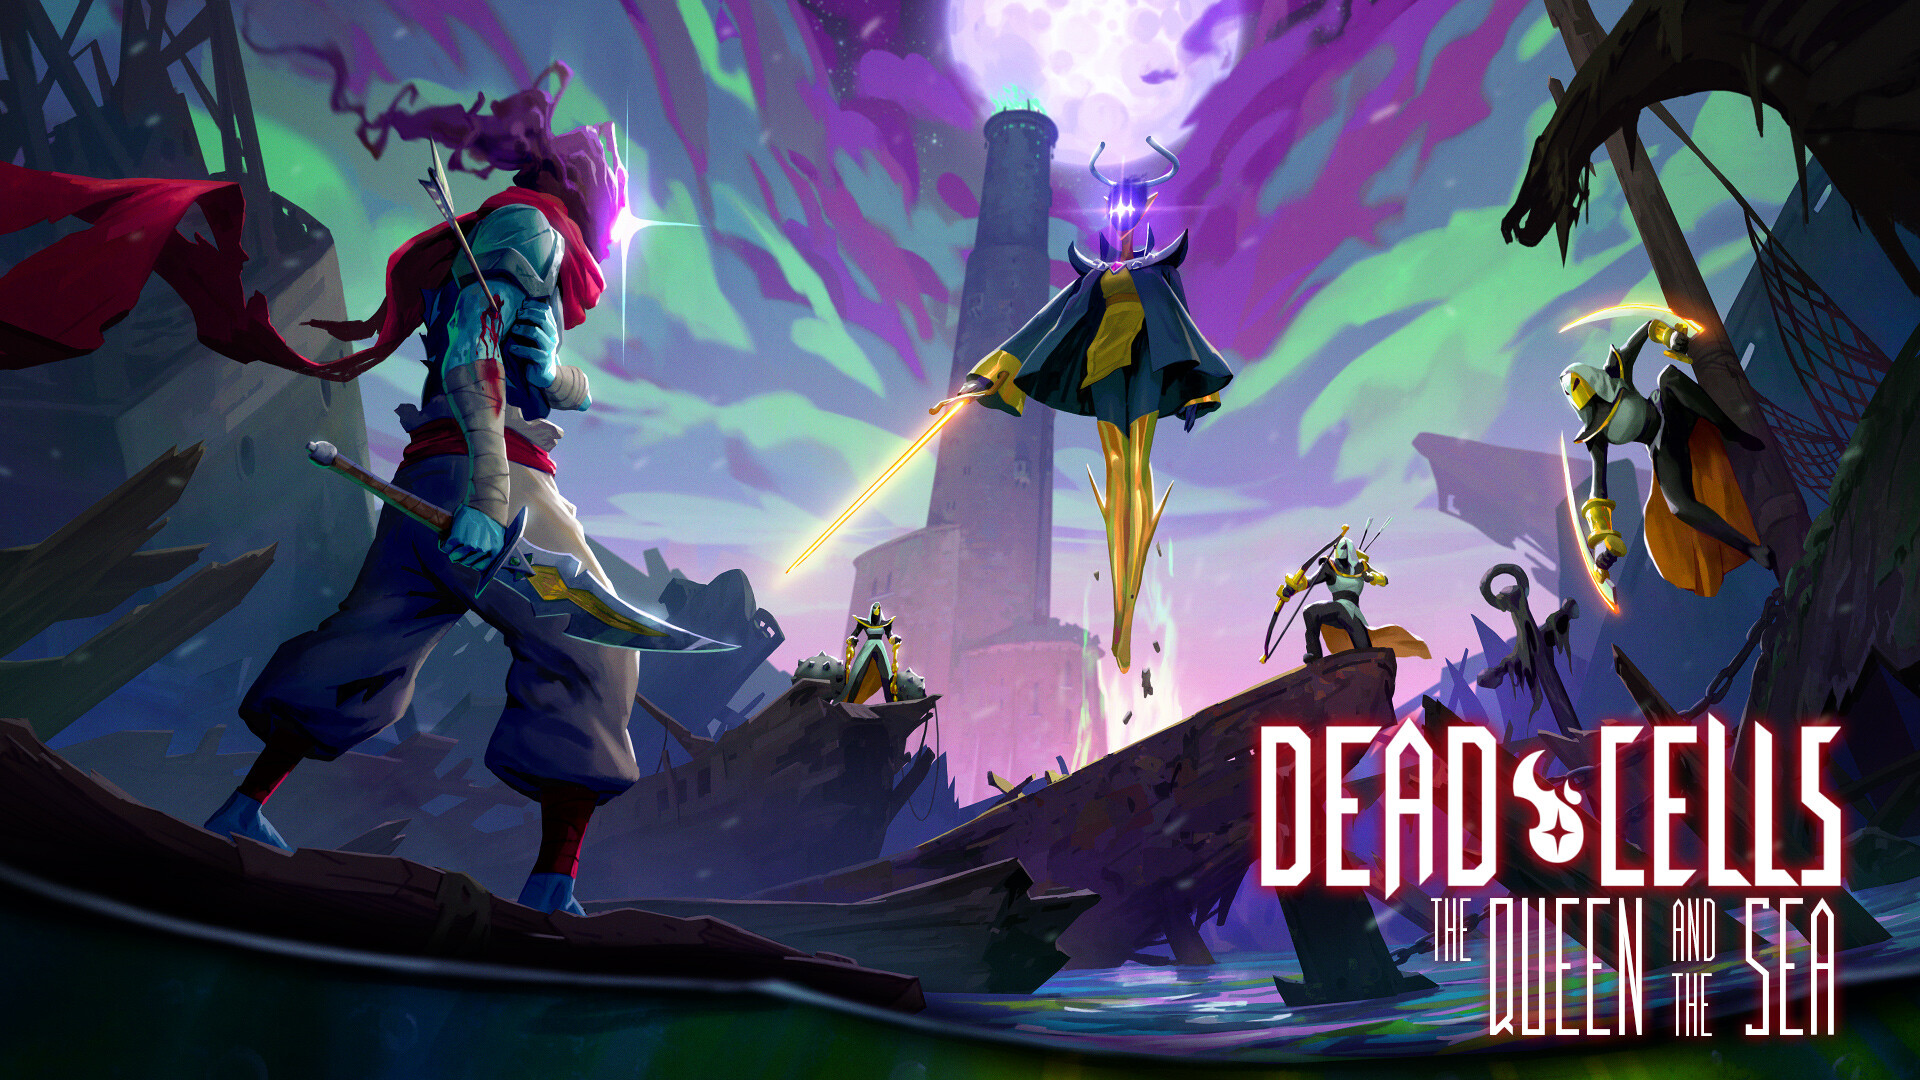 Dead Cells - The Queen and the Sea DLC Keyart by Michel Donzé